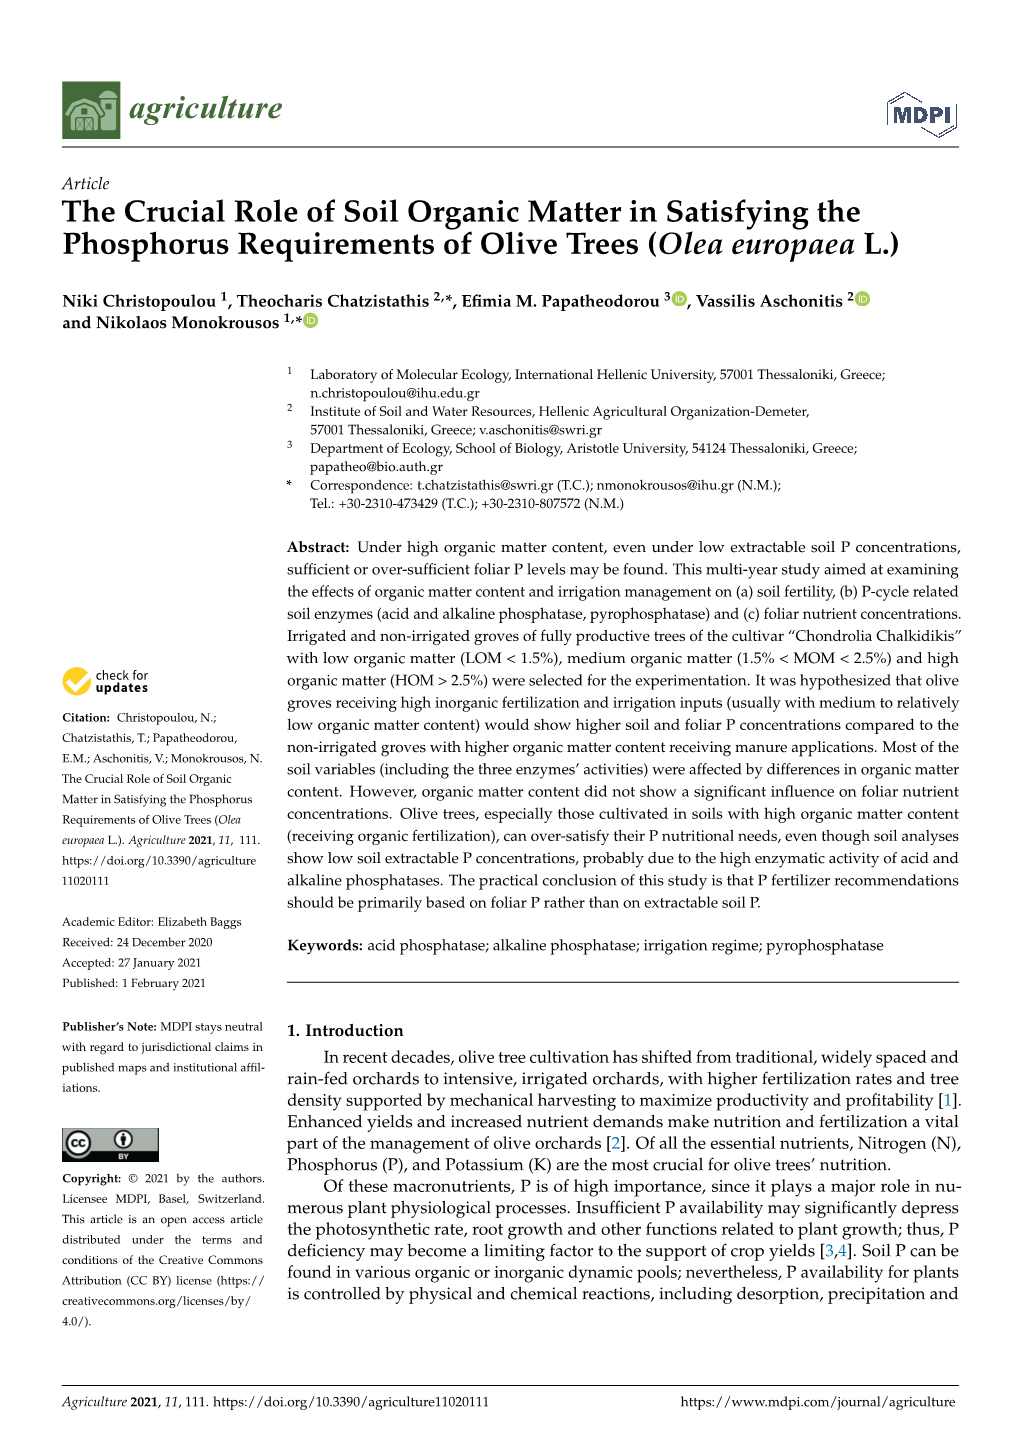 The Crucial Role of Soil Organic Matter in Satisfying the Phosphorus Requirements of Olive Trees (Olea Europaea L.)